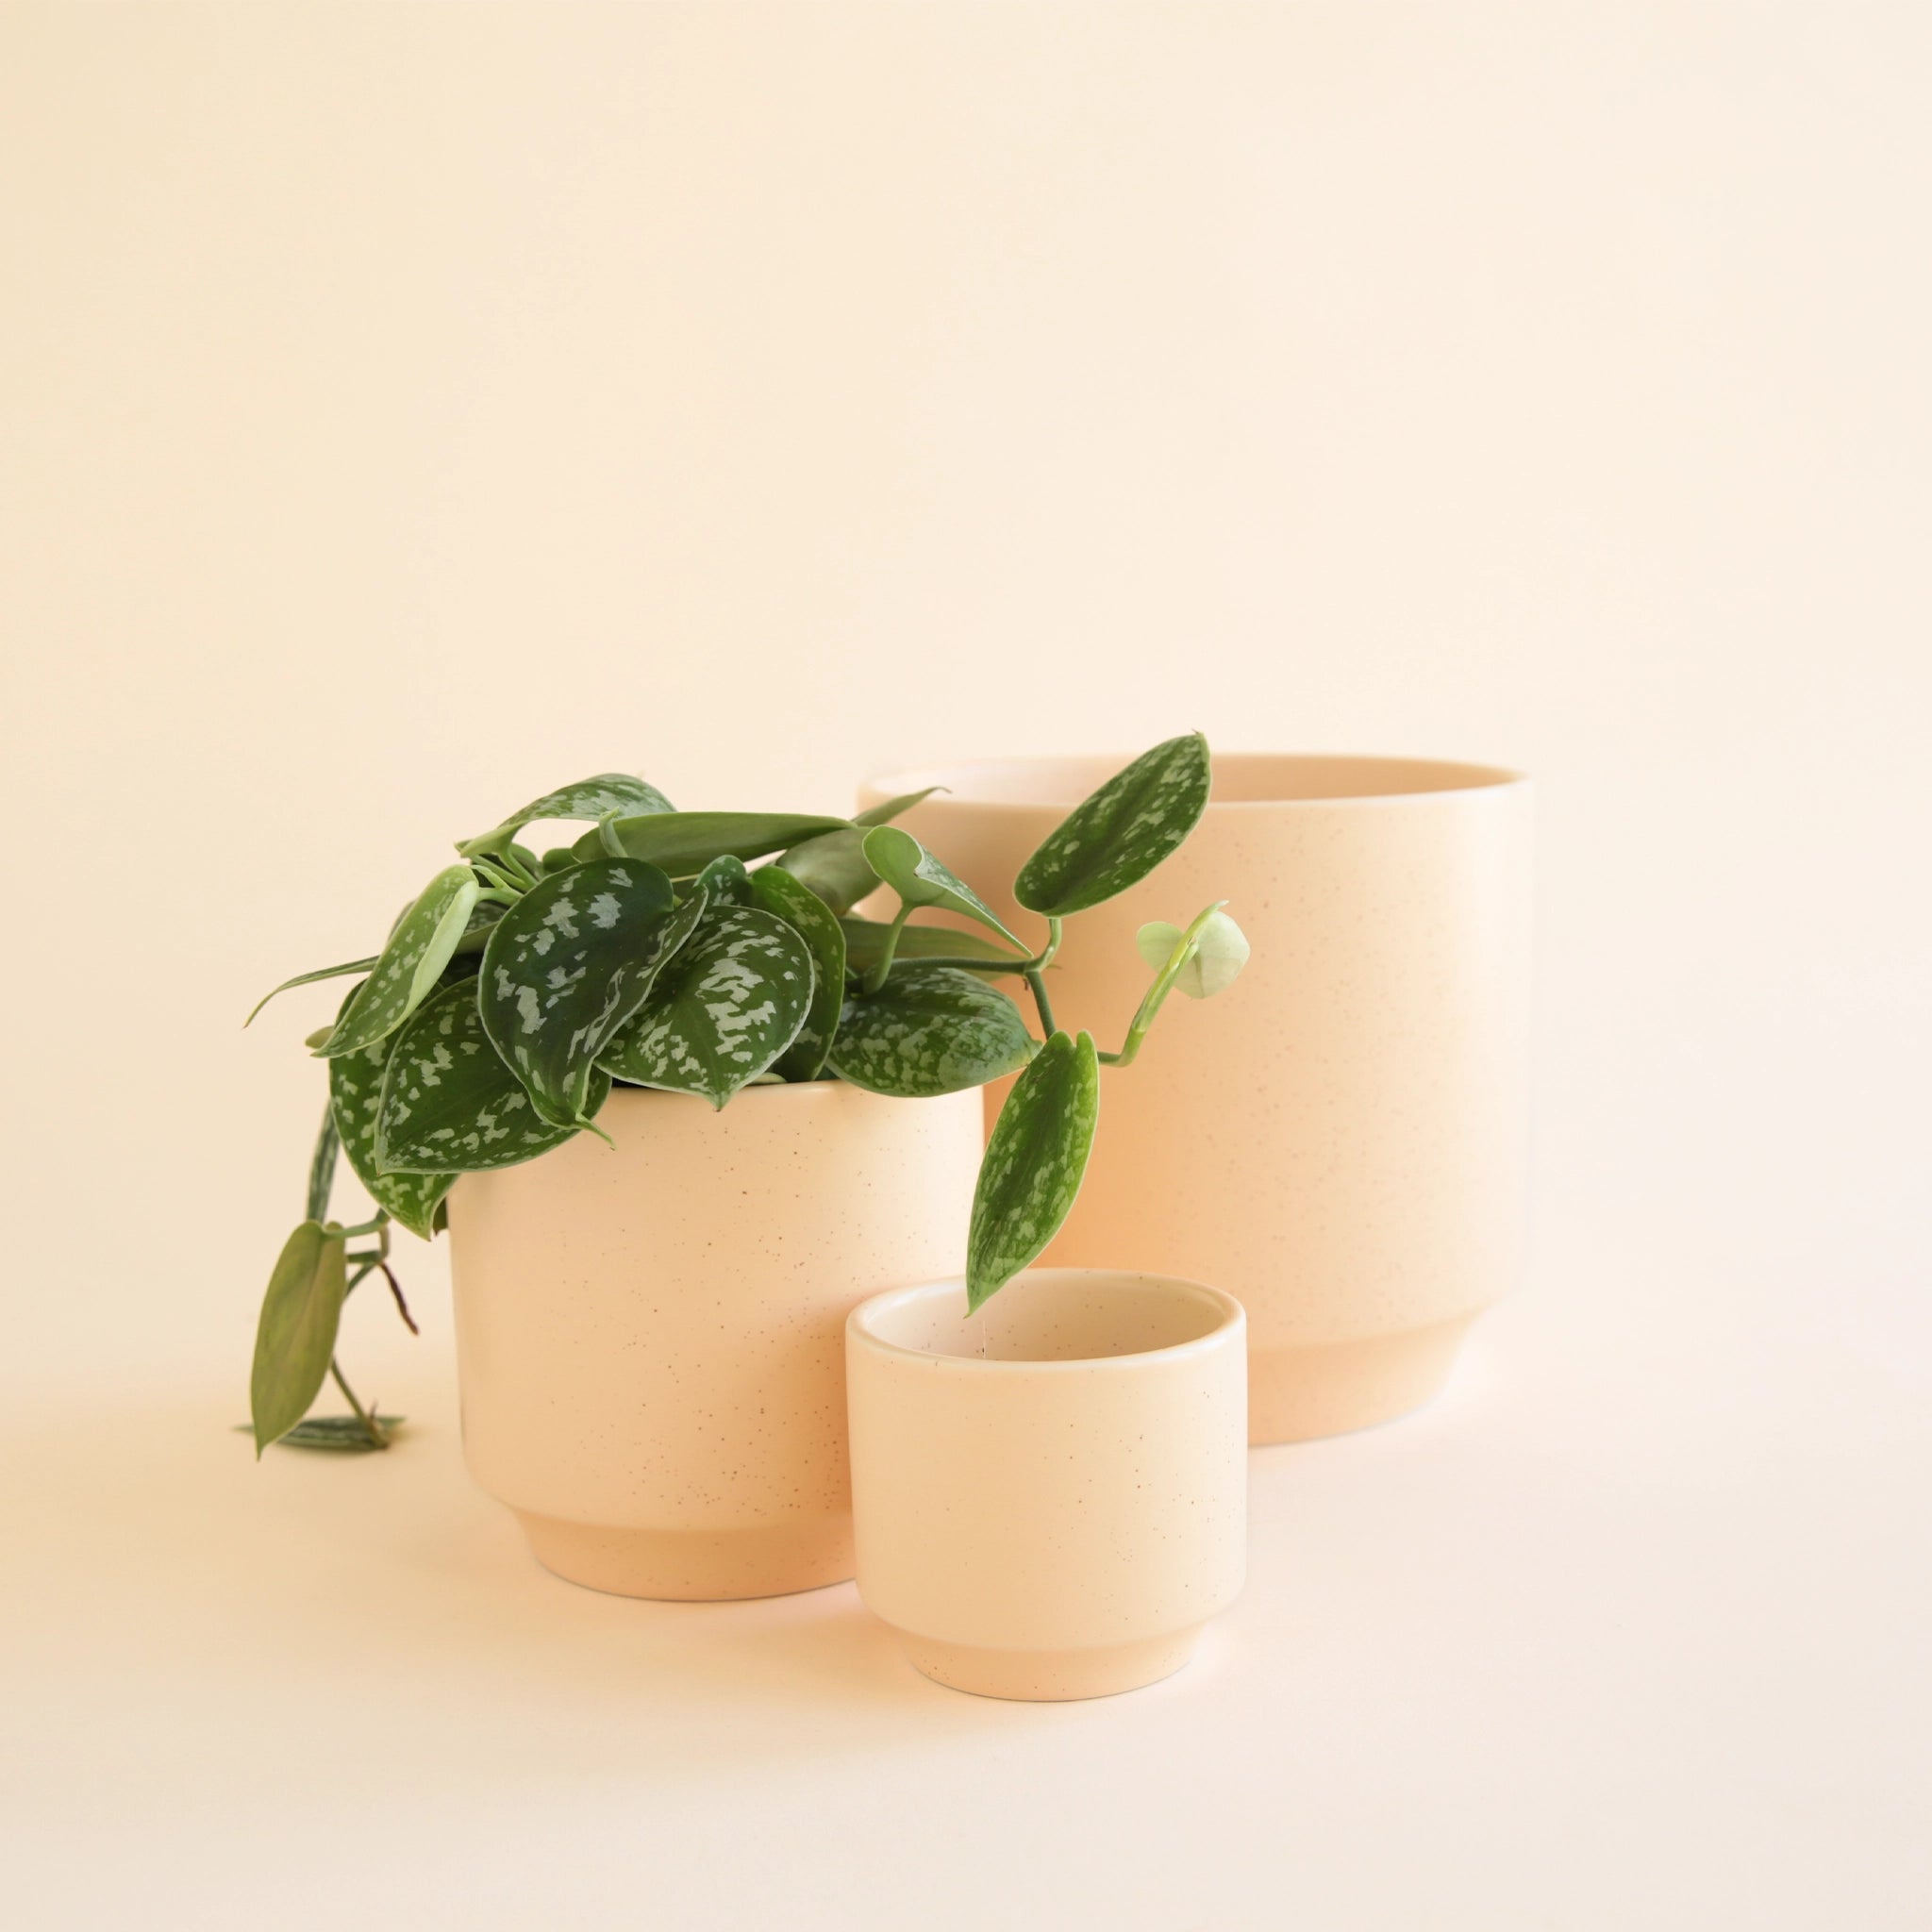 On an ivory background is three different sized ceramic planters in a neutral tan shade with a slight speckle and a tapered bottom.